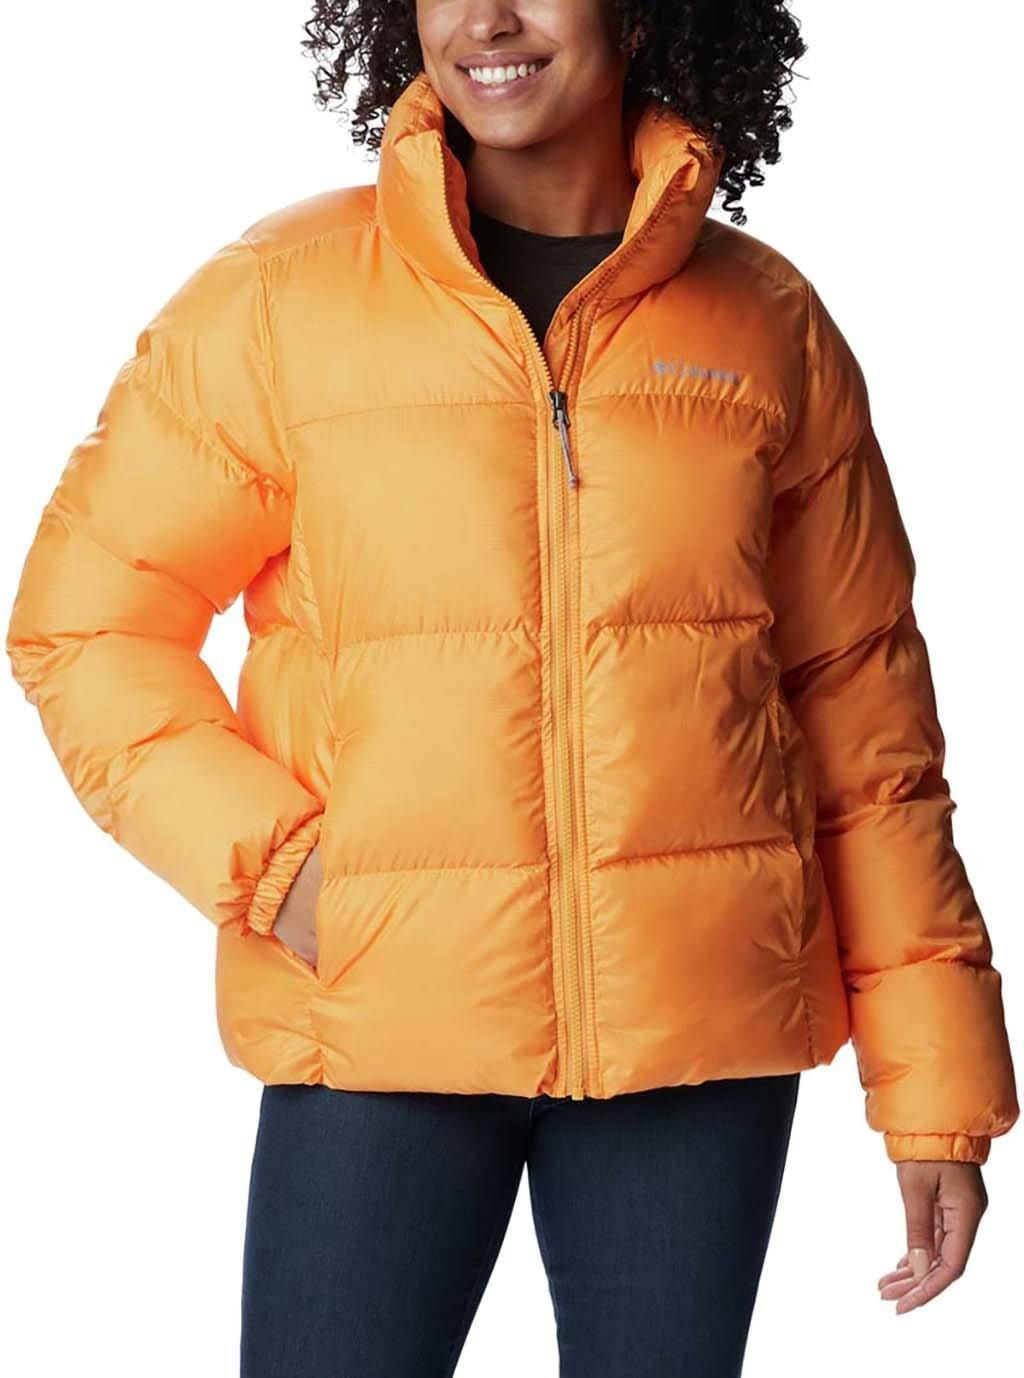 Product image for Puffect Jacket - Women's